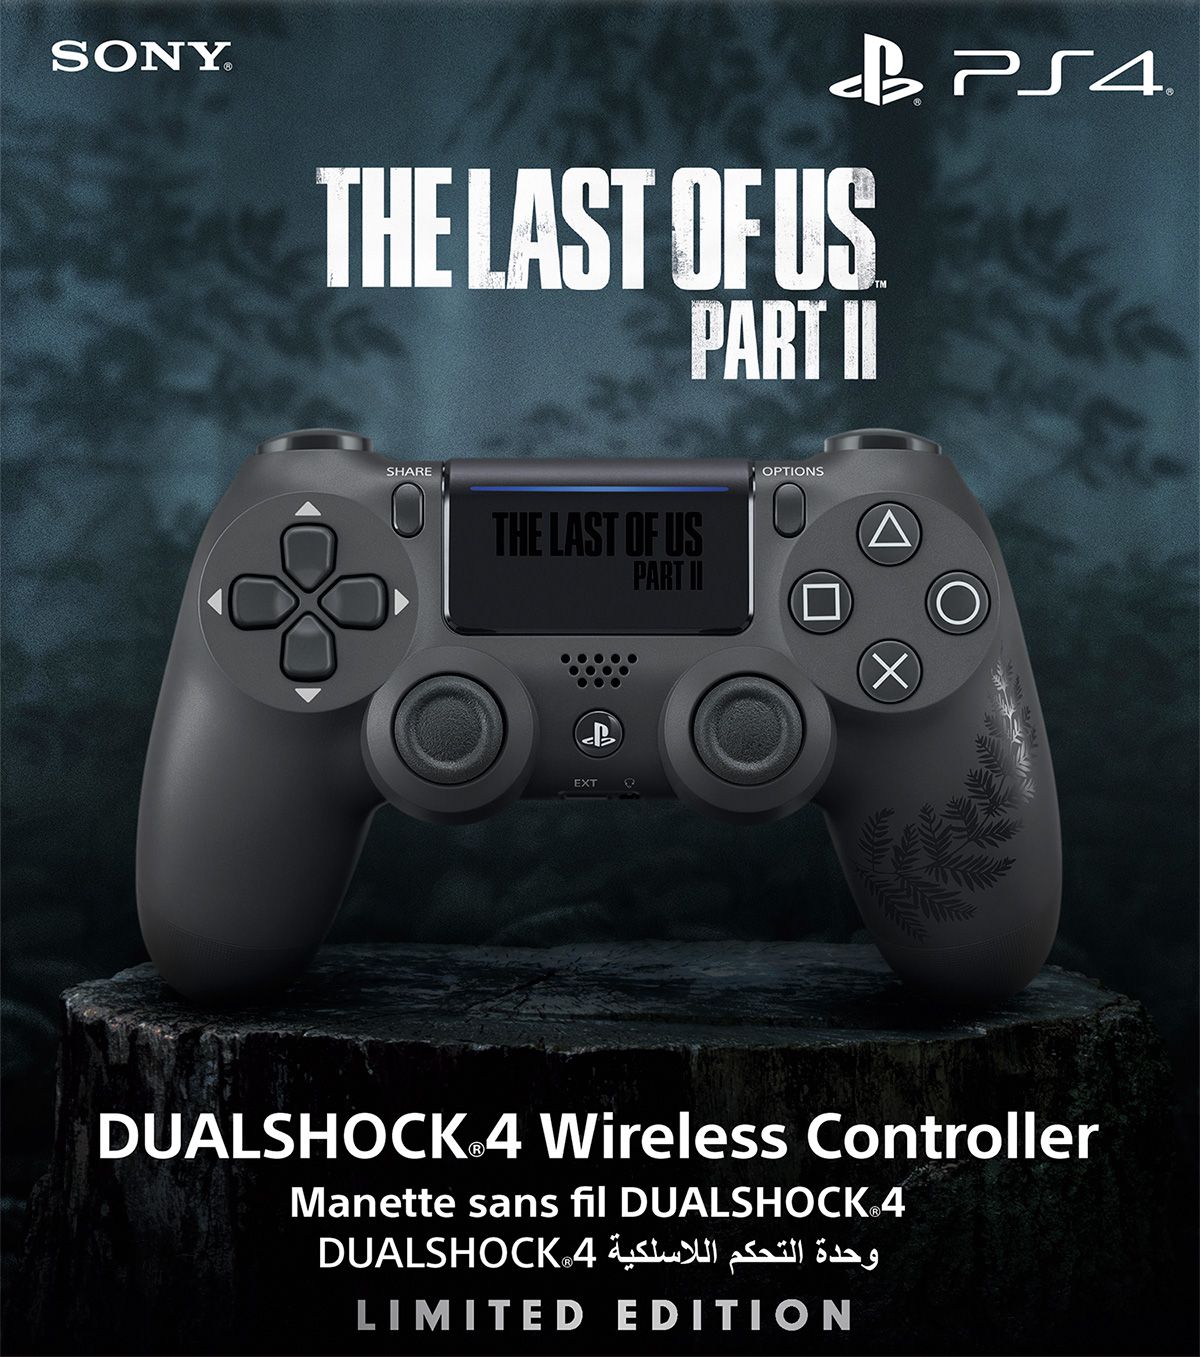 the last of us limited edition controller